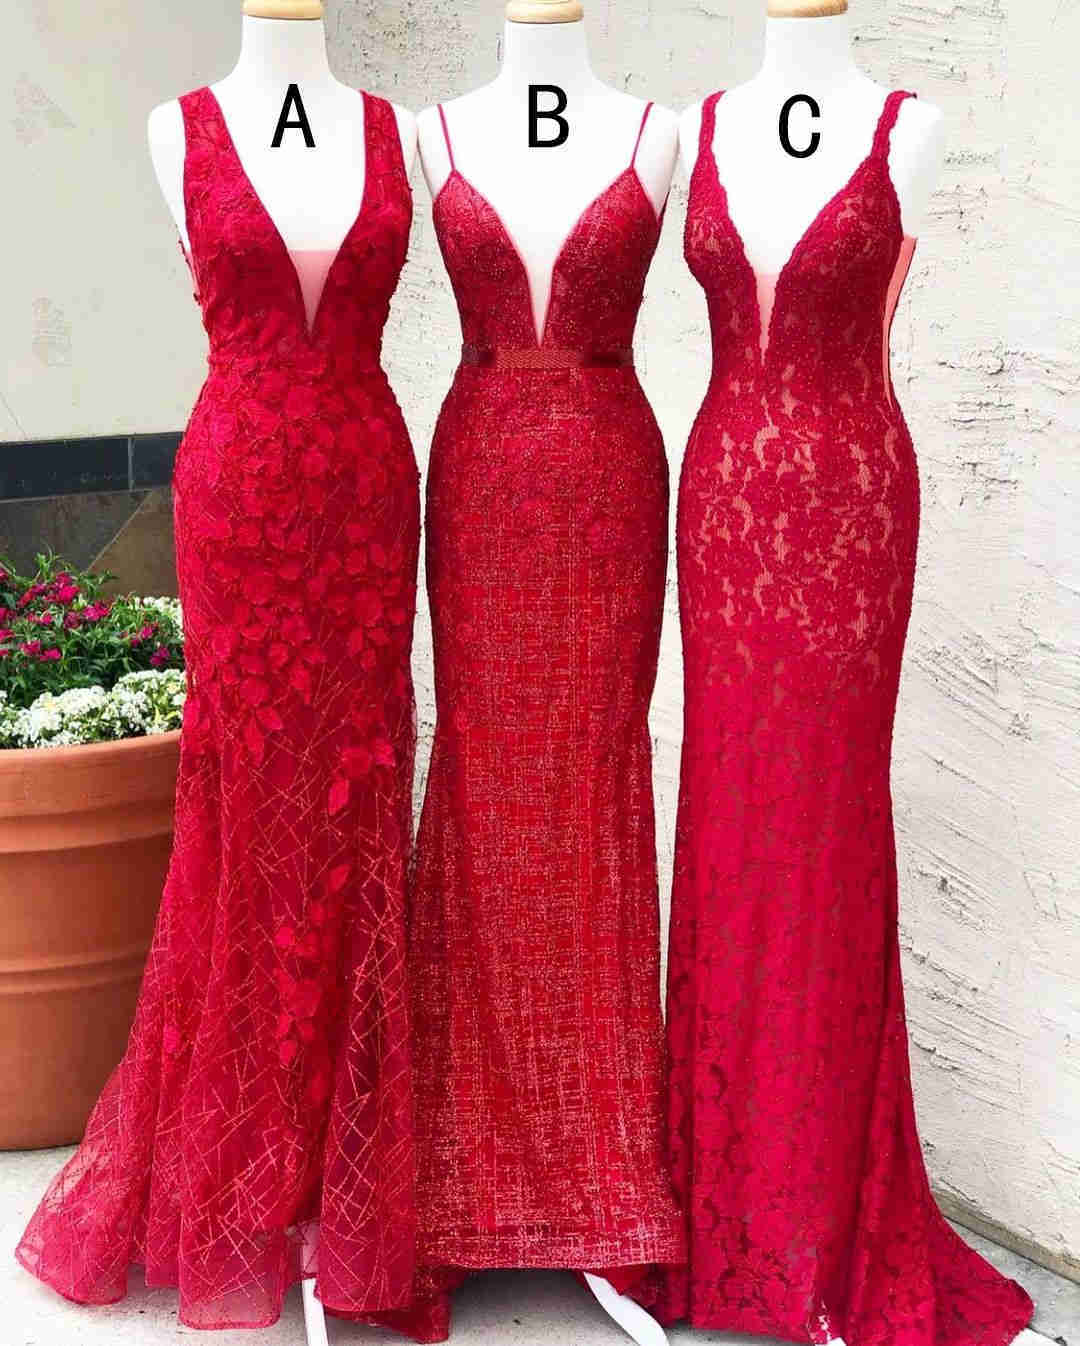 Classic V-Neck Red Lace Long Prom Dress?Classic V-Neck Red Lace Long Prom Dress?long dress,cheap dress,evening dress,bridal dress,prom dress 2021